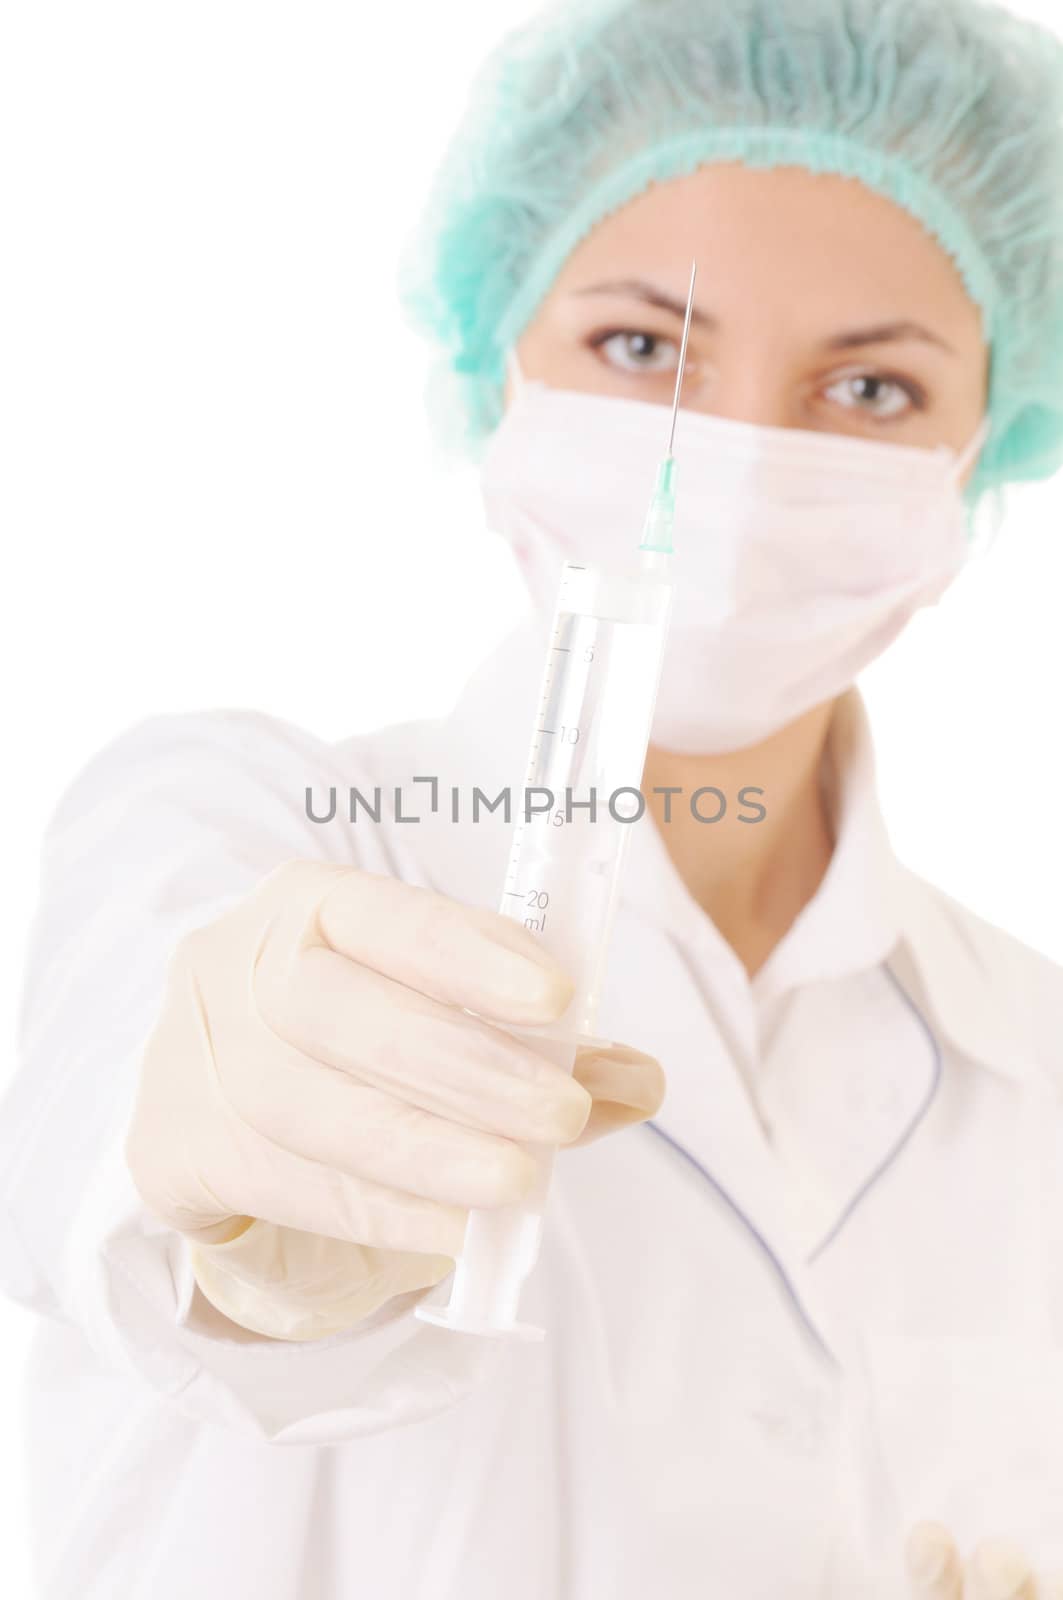 Doctor in mask and cap with syringe in hands isolated on white background. Focus on the syringe. 